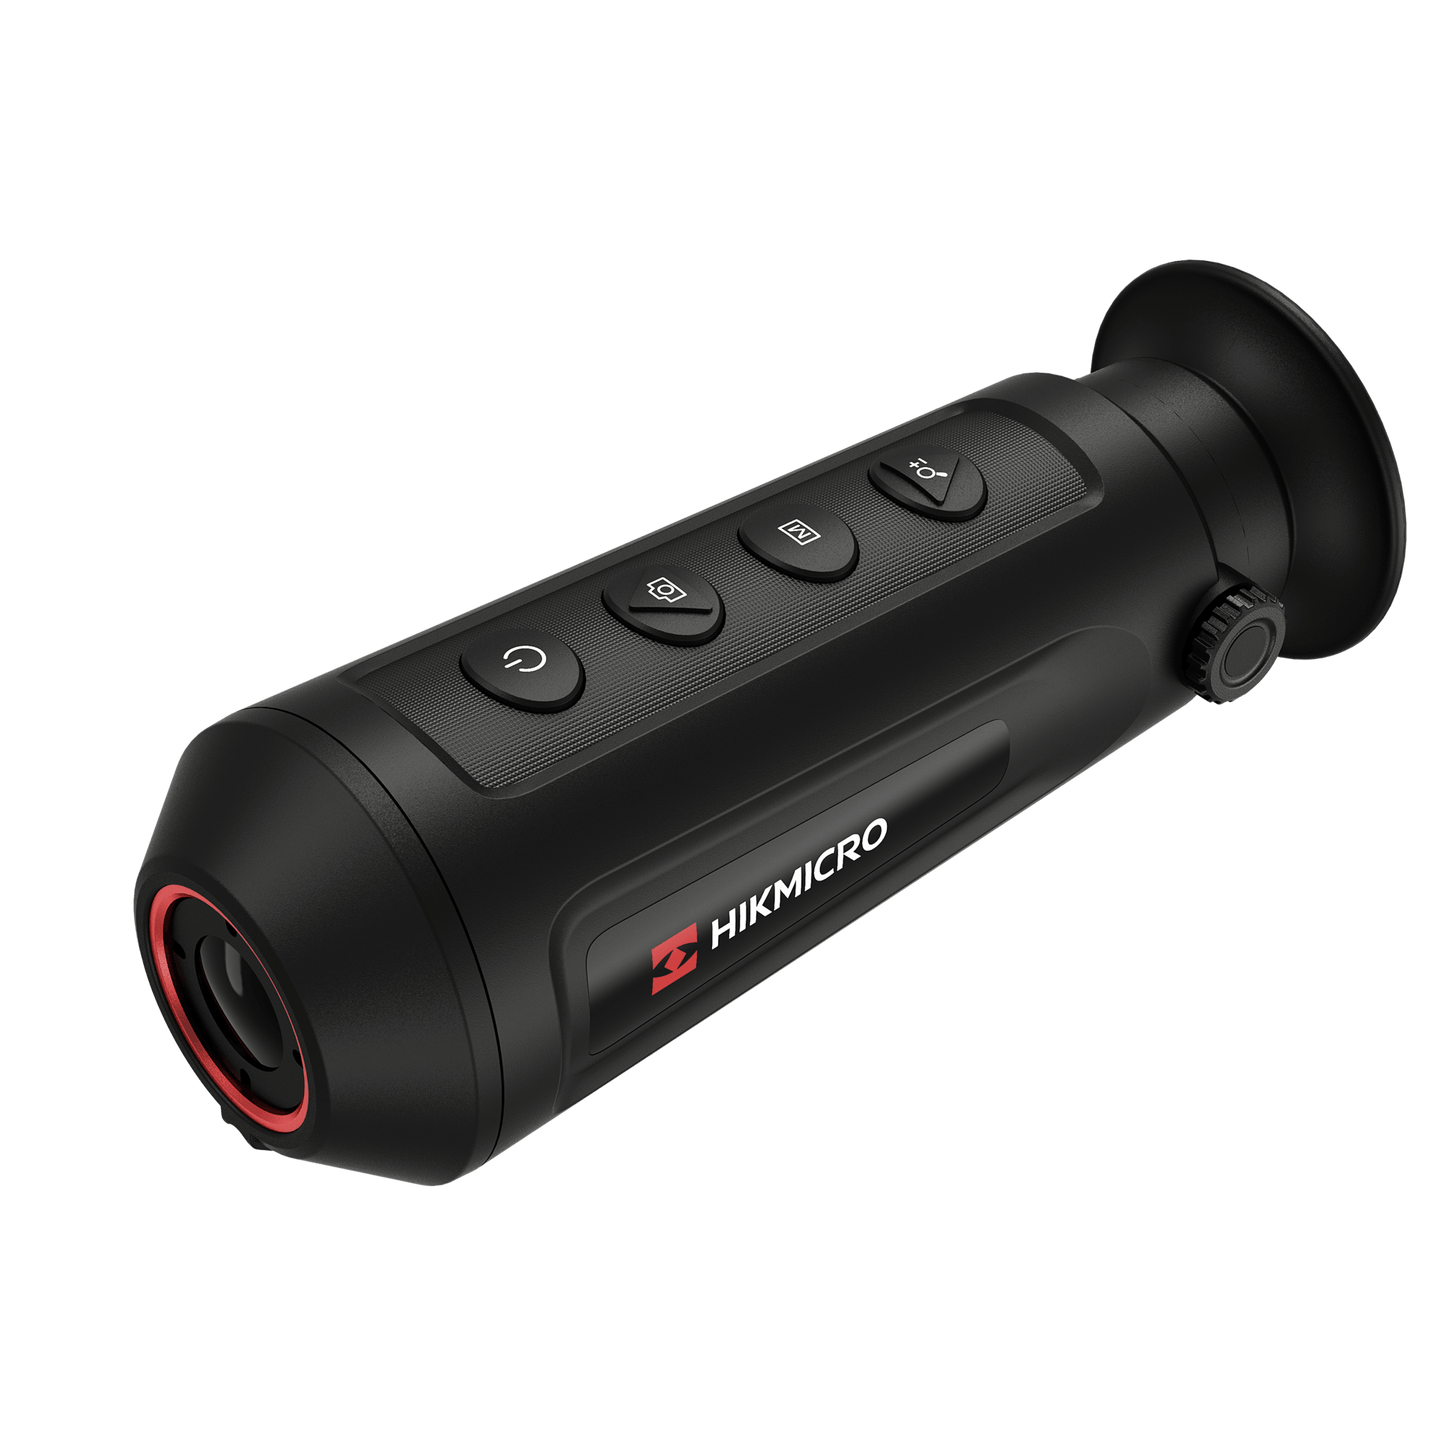 Cape Thermal - The best thermal imaging monoculars for sale - HikMicro LYNX Pro LE15 Handheld thermal imaging monocular - Left Side View